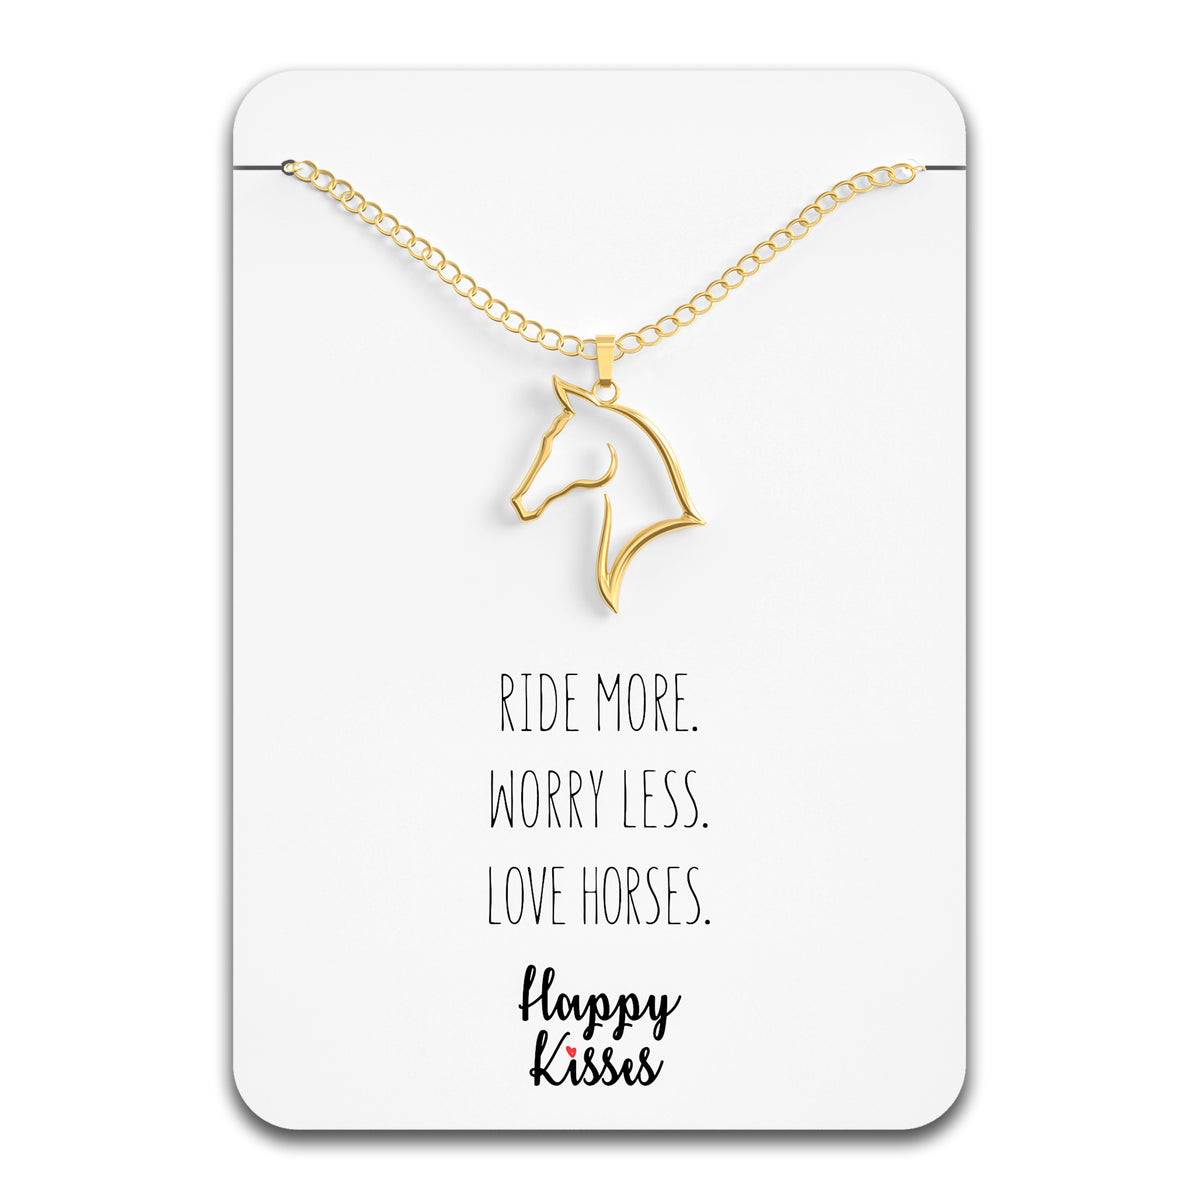 Happy Kisses Horse Necklace - Elegant Horse Themed Jewelry for Girls 8-12 & Women - Charm with Message Card - Equestrian Gifts for “I Love Horses”